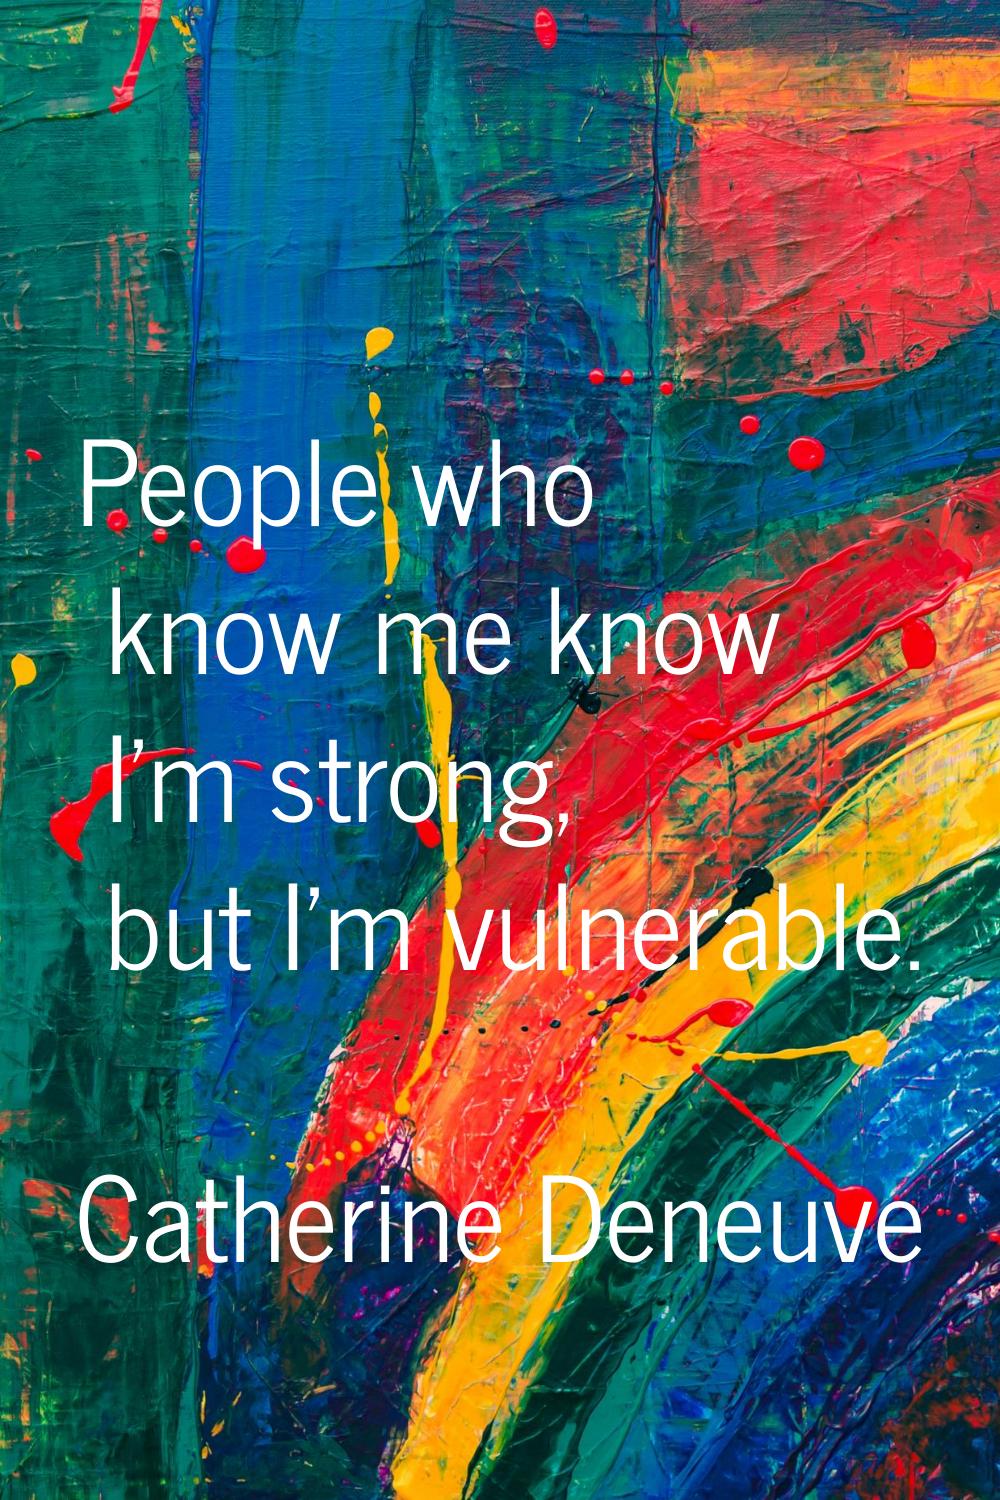 People who know me know I'm strong, but I'm vulnerable.